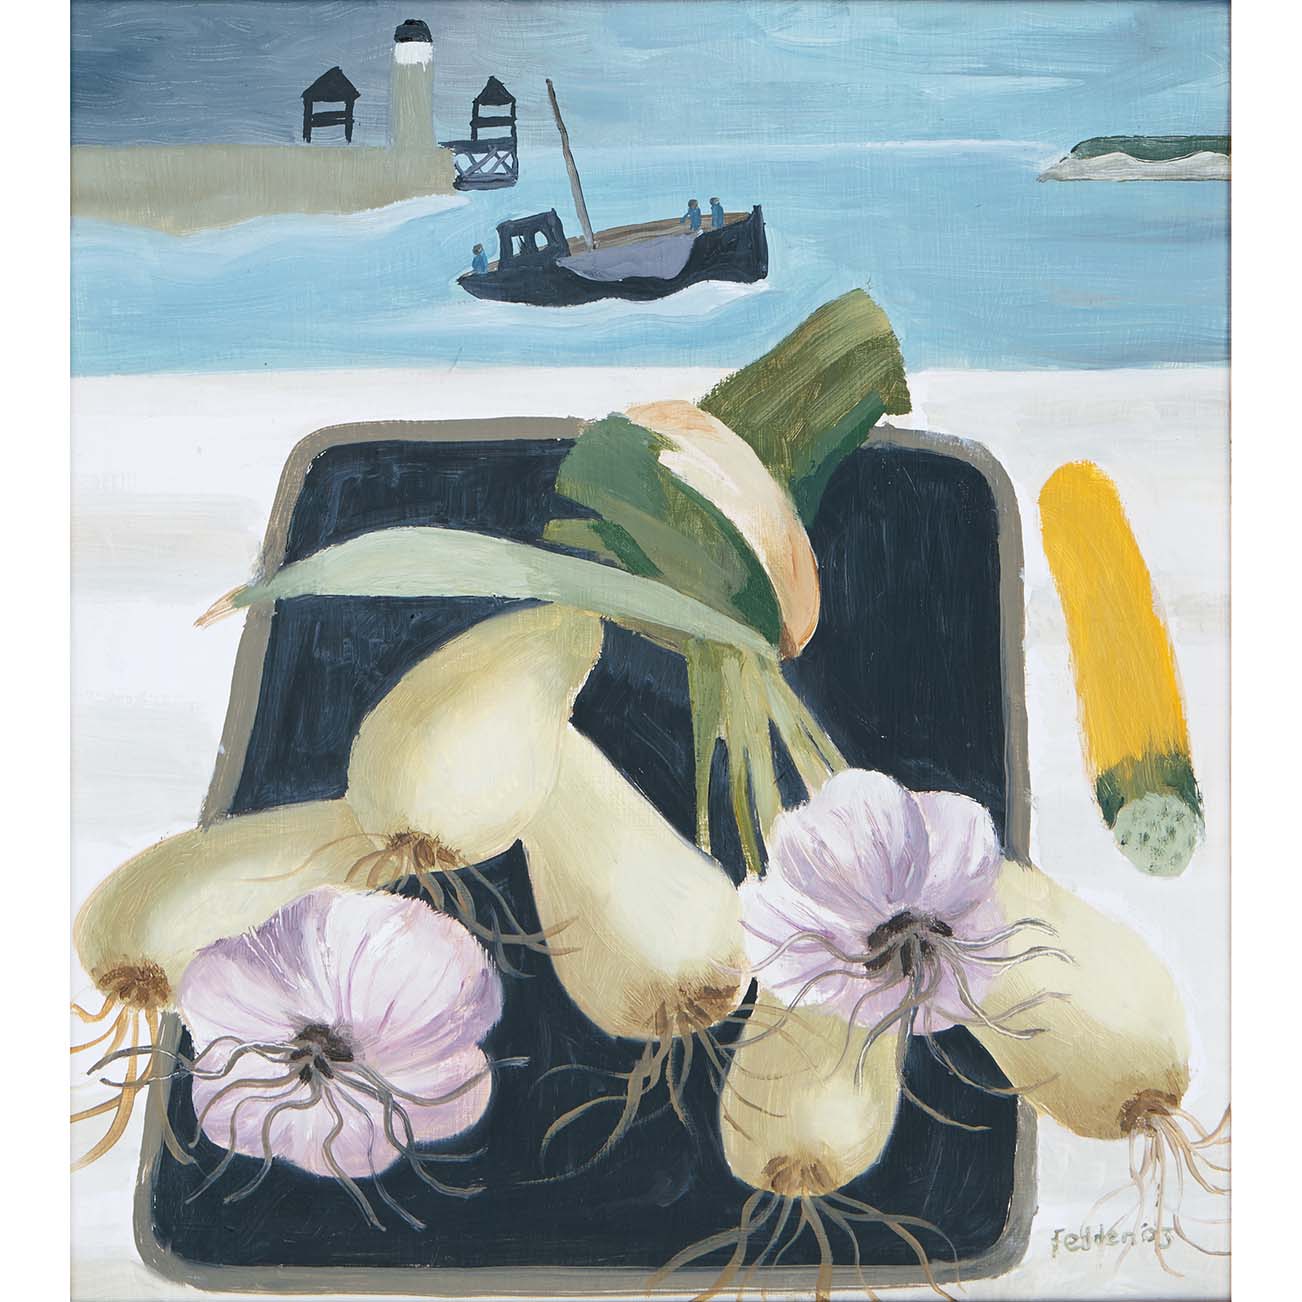 MARY FEDDEN. ONIONS AND GARLIC. 2003. SOLD